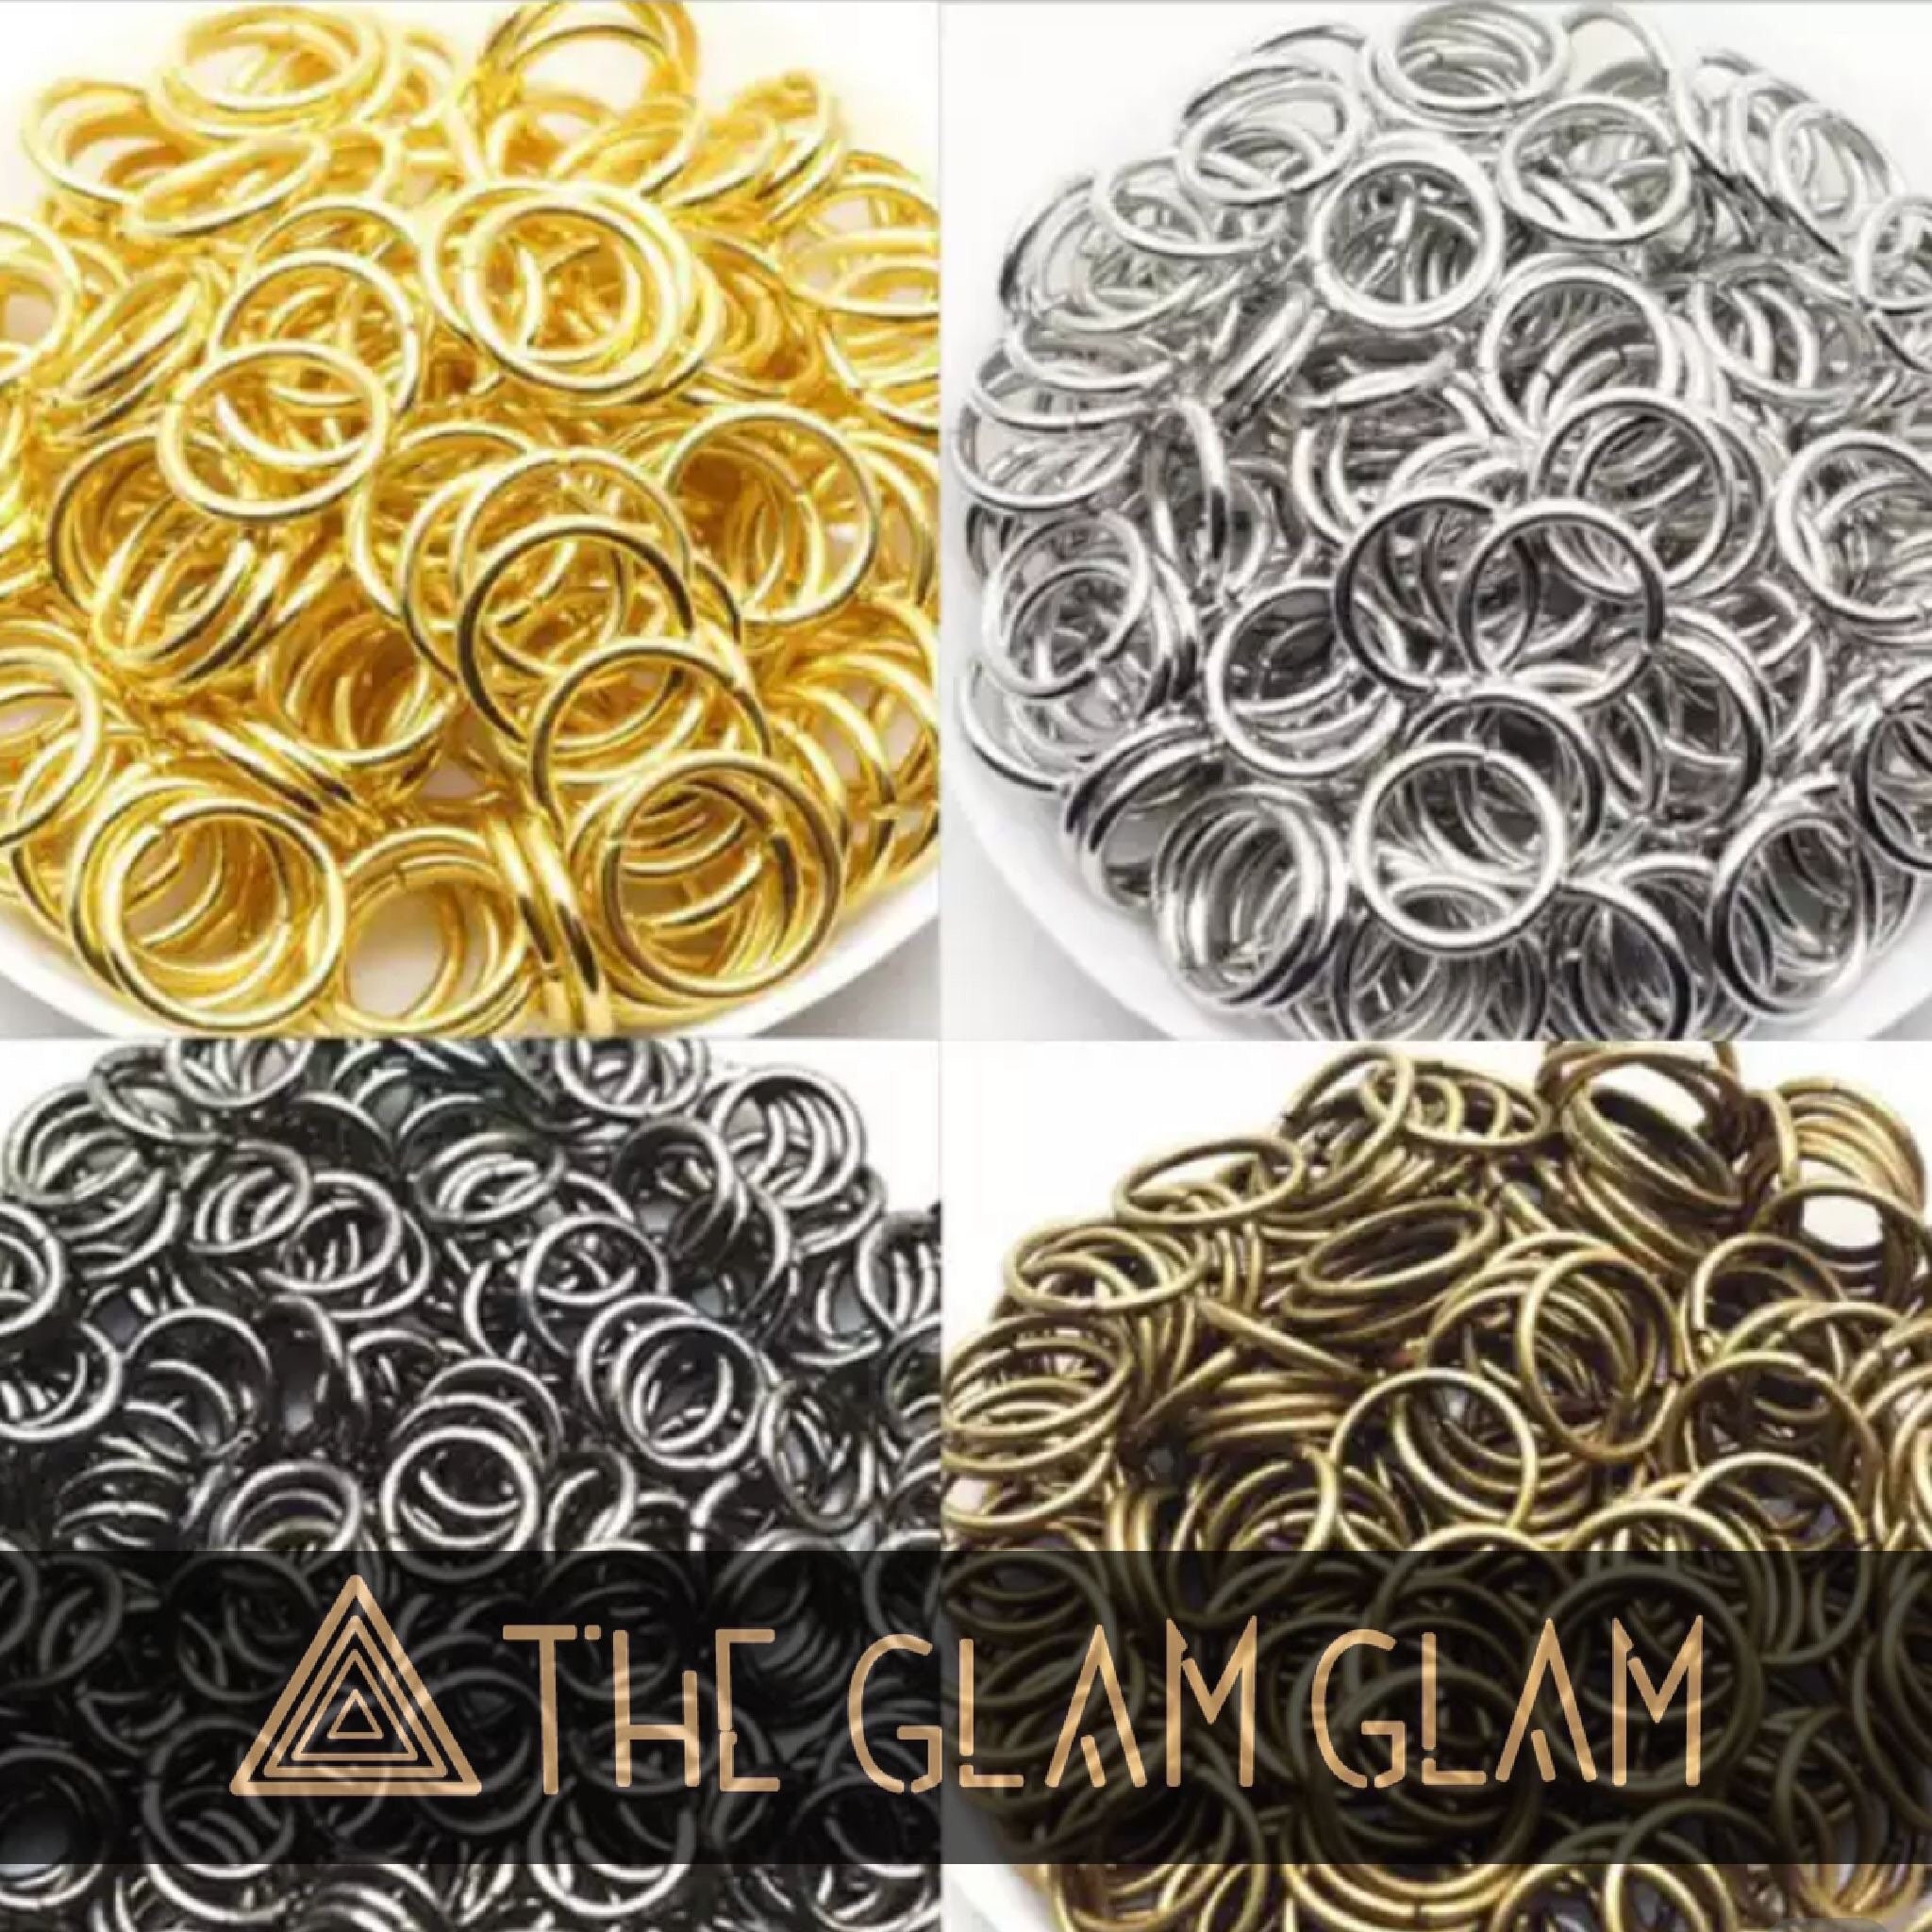 Set of 16 Variety of Hair Beard Dreadlocks Cuffs Rings Mixed Gold or Silver Jewelry  Braid Charm Filigree Tube Coils Bling Hair Variety Pack 